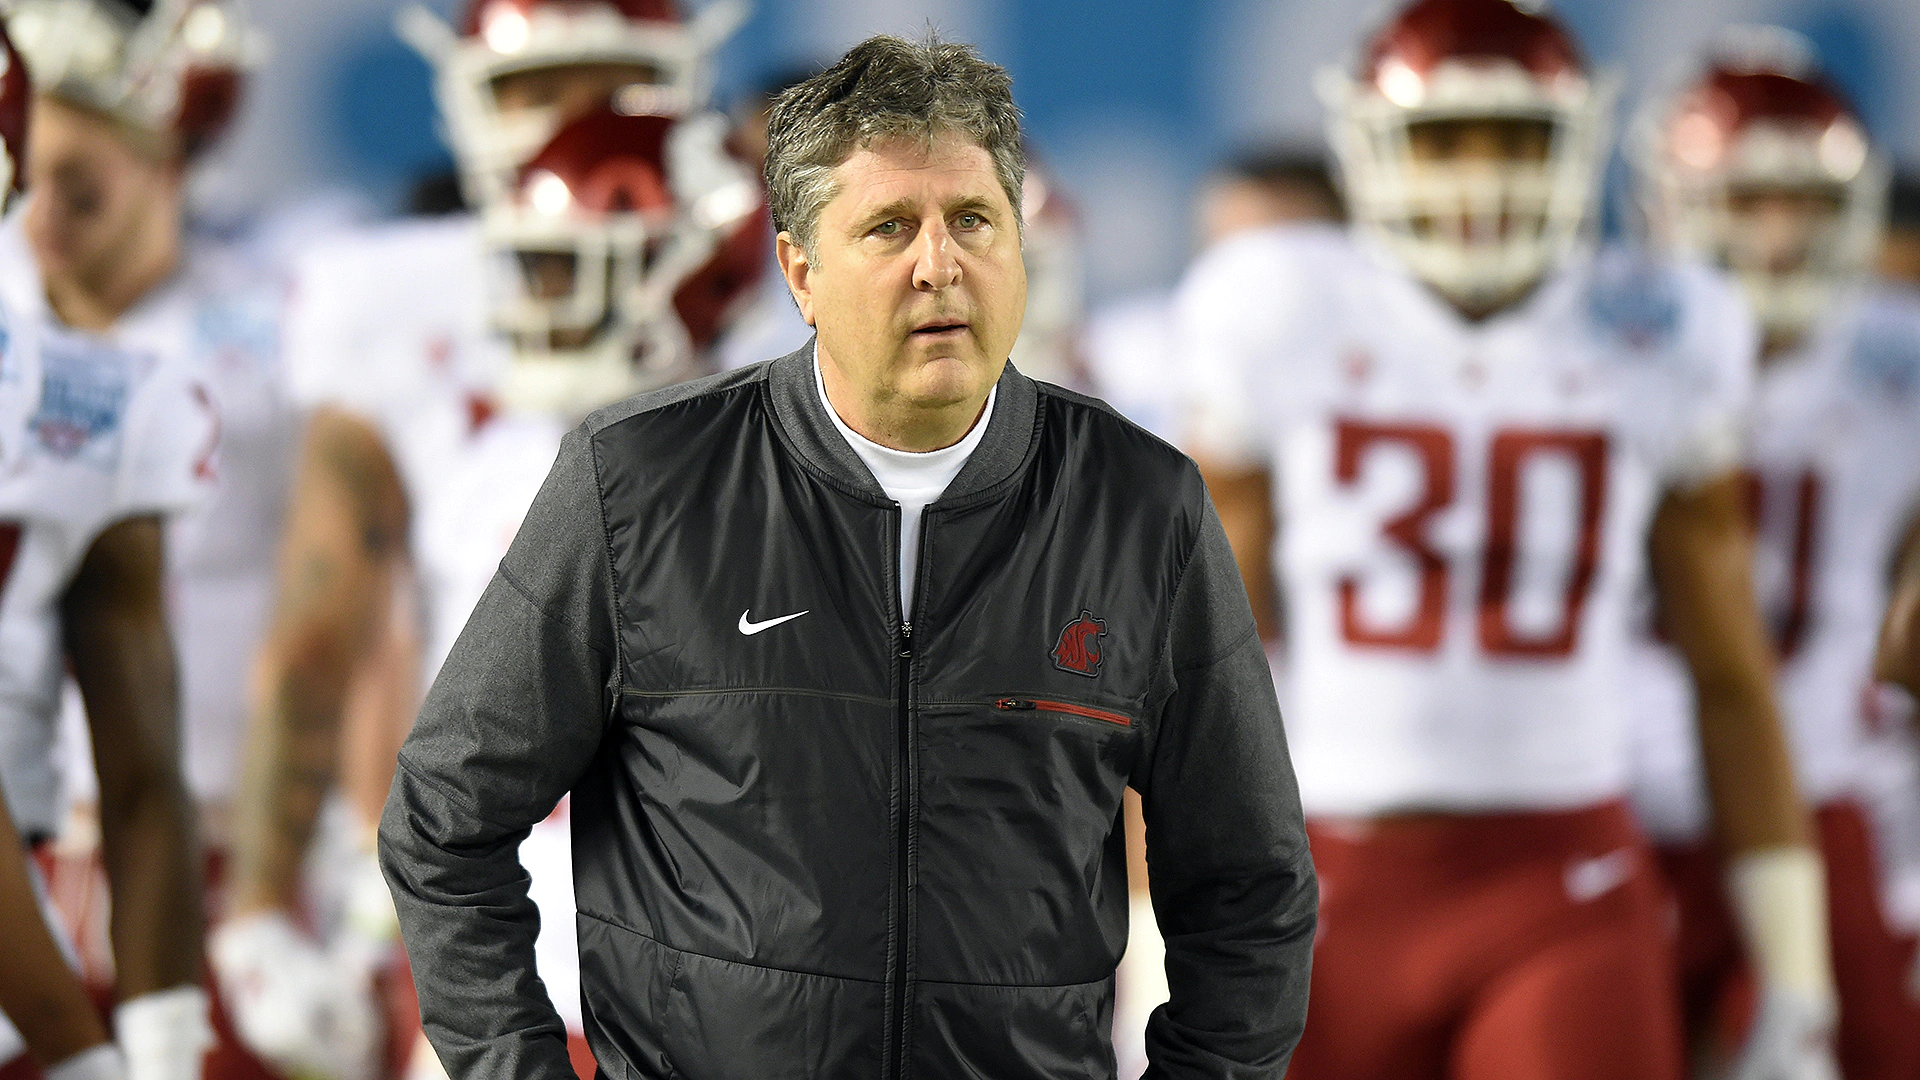 Leach on grizzlies, walk-up music and hating golf